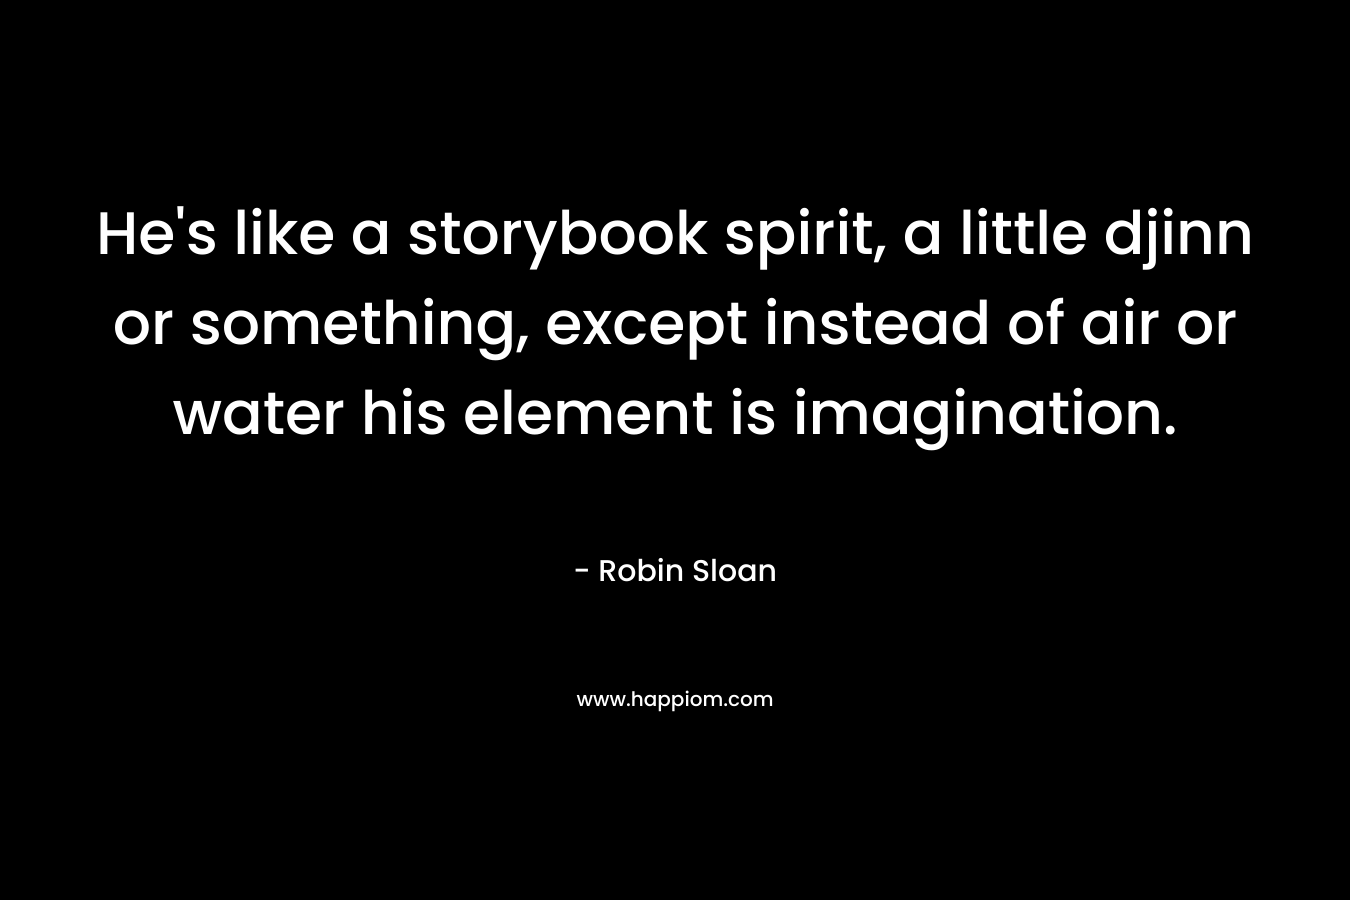 He’s like a storybook spirit, a little djinn or something, except instead of air or water his element is imagination. – Robin Sloan